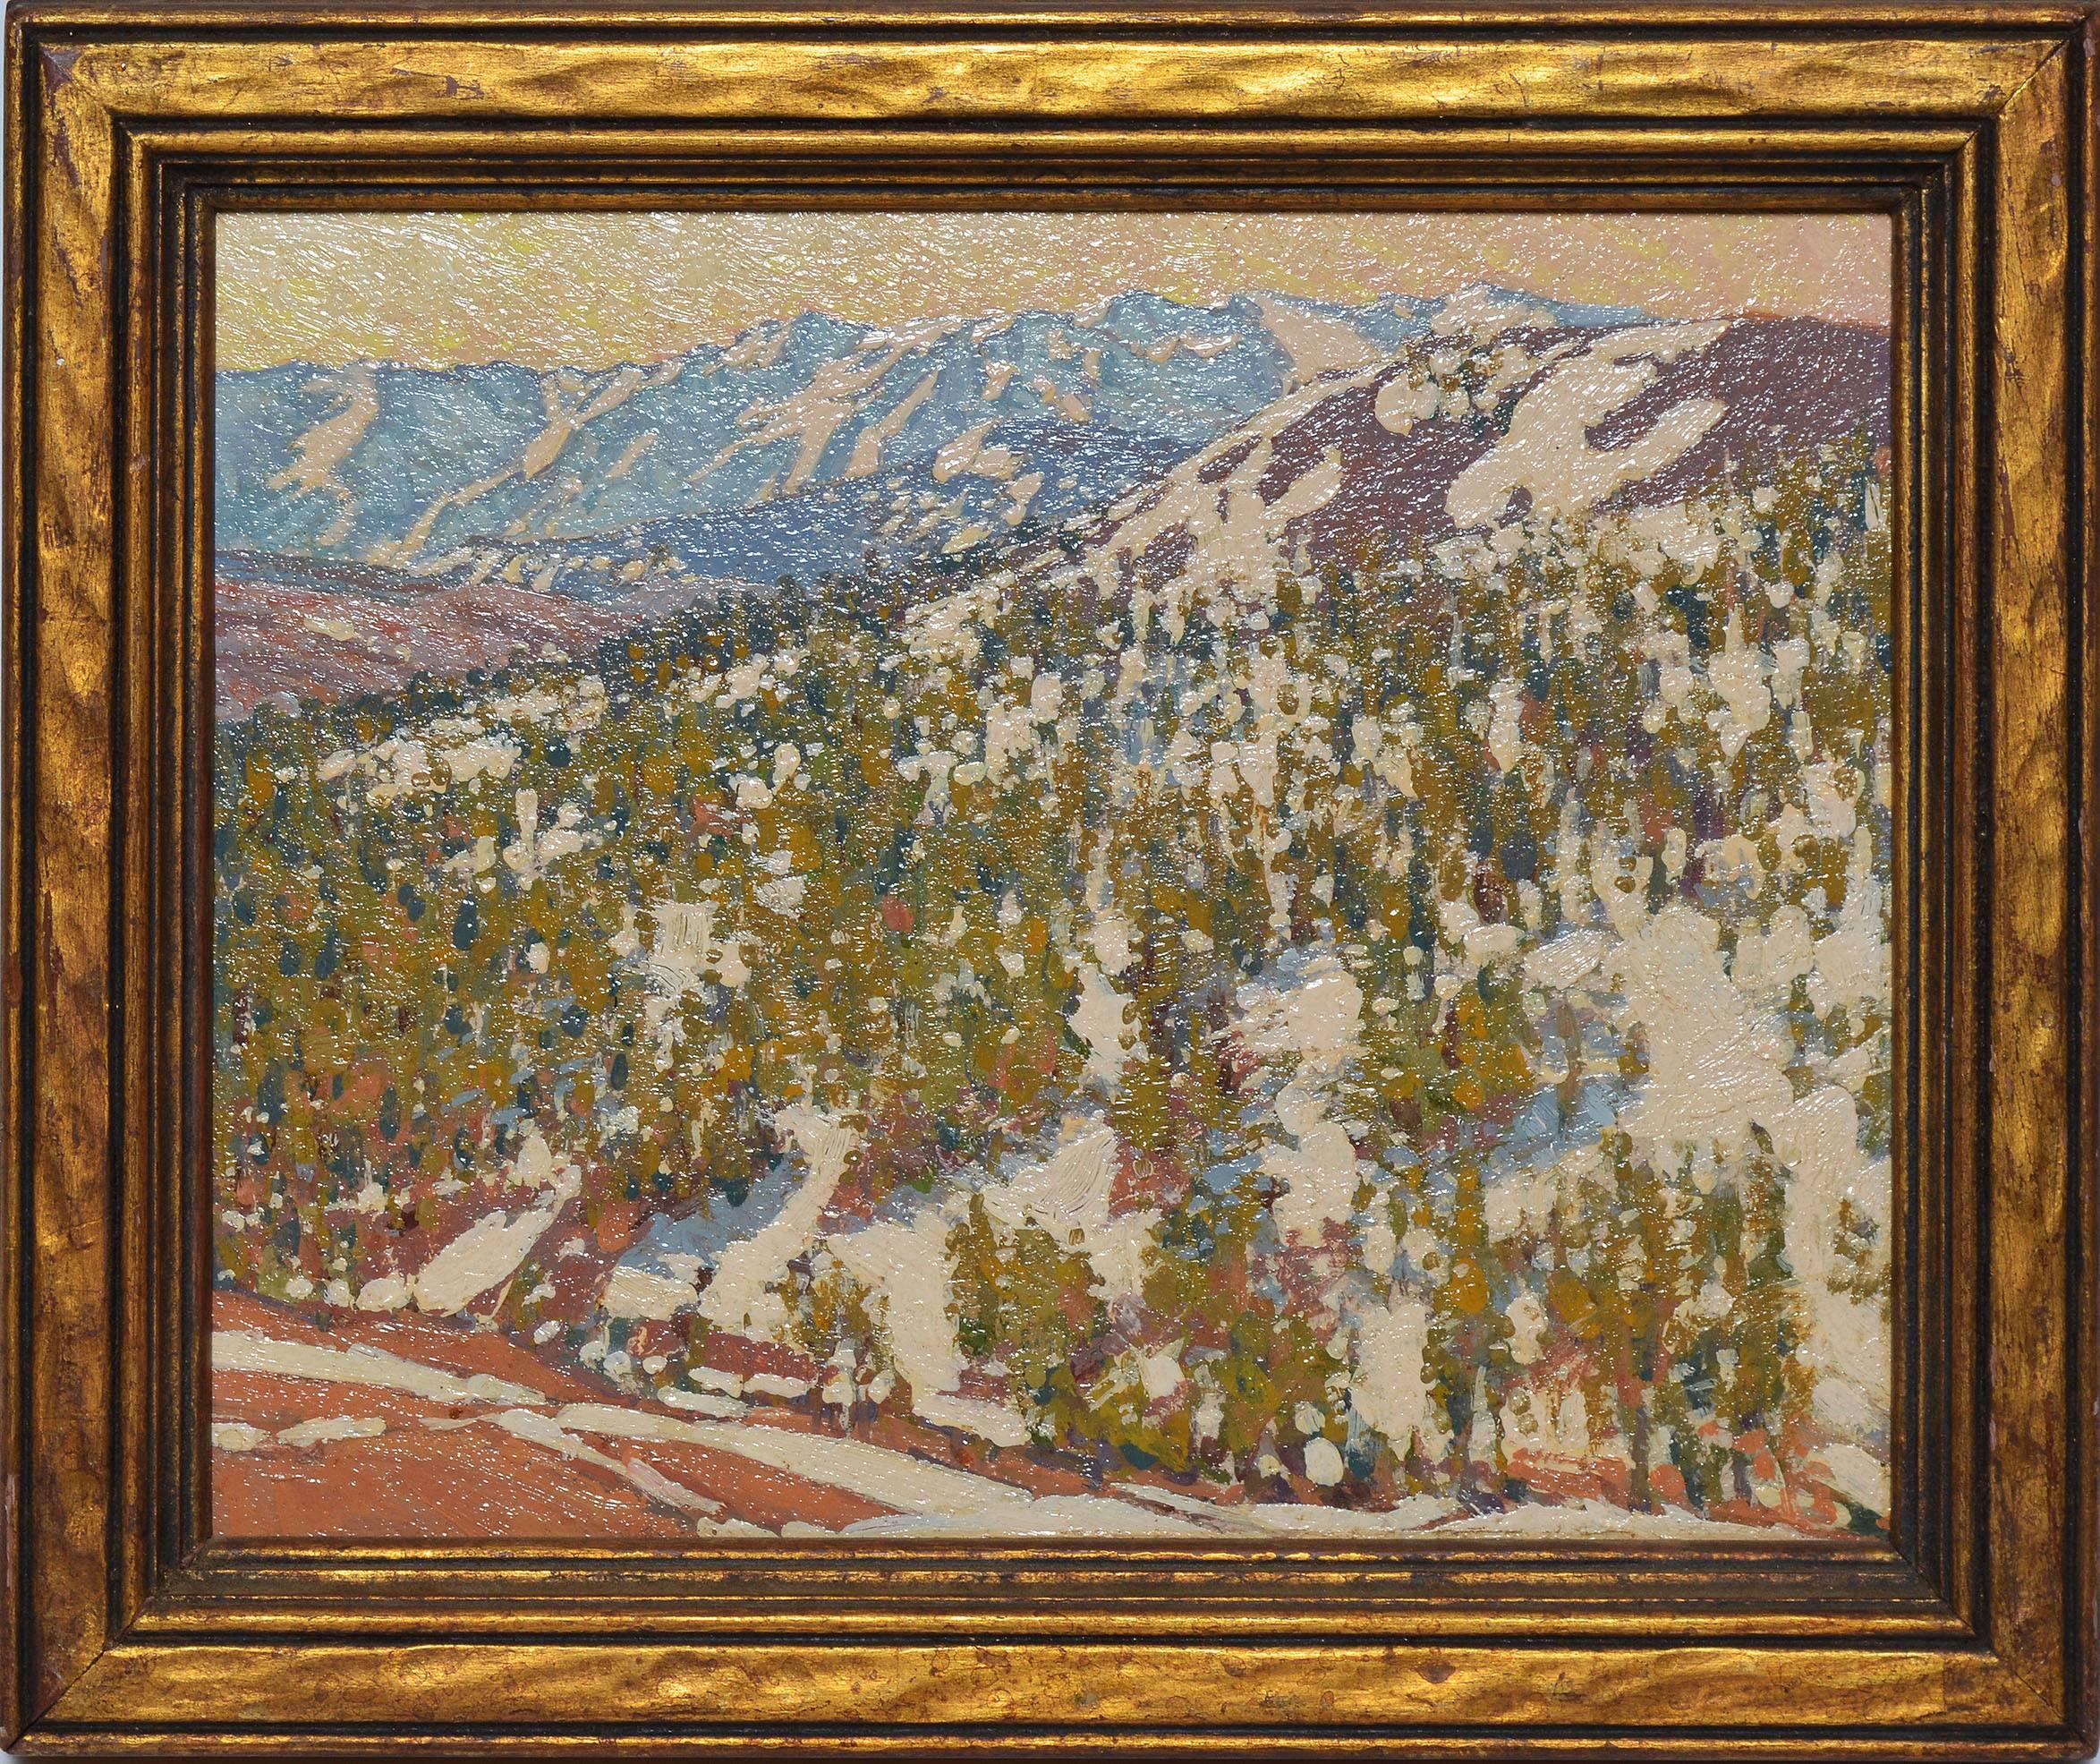 Irion Shields Landscape Painting - Winter Landscape in the Sonora Pass, California 